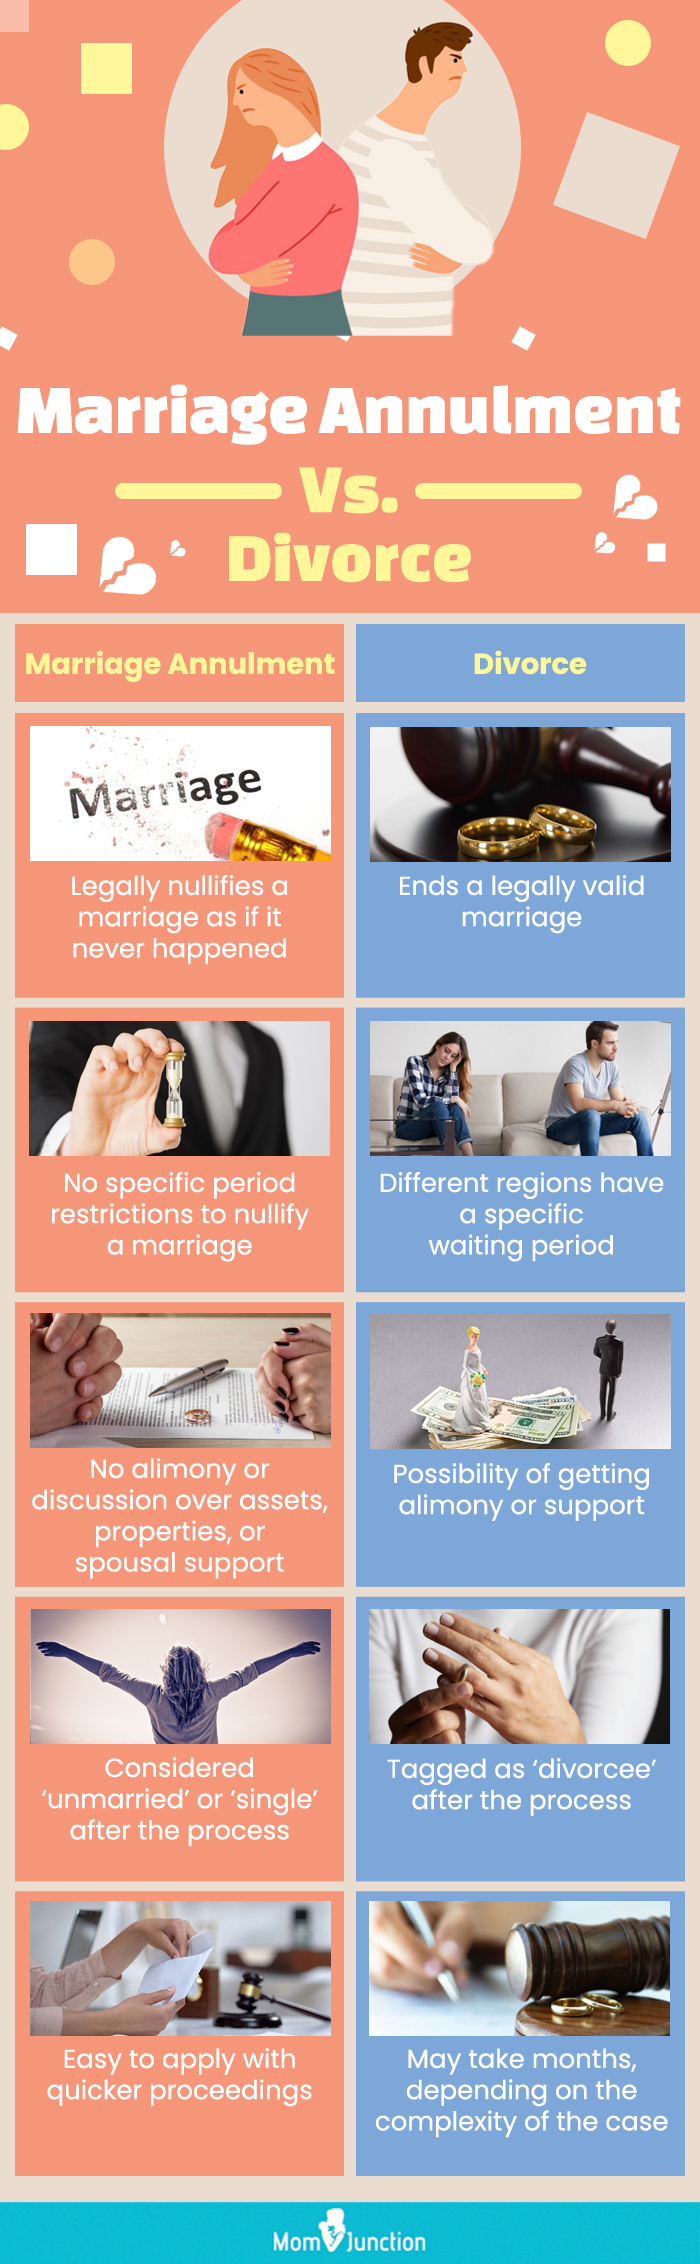 Love, Wedding, Marriage calls for annulment